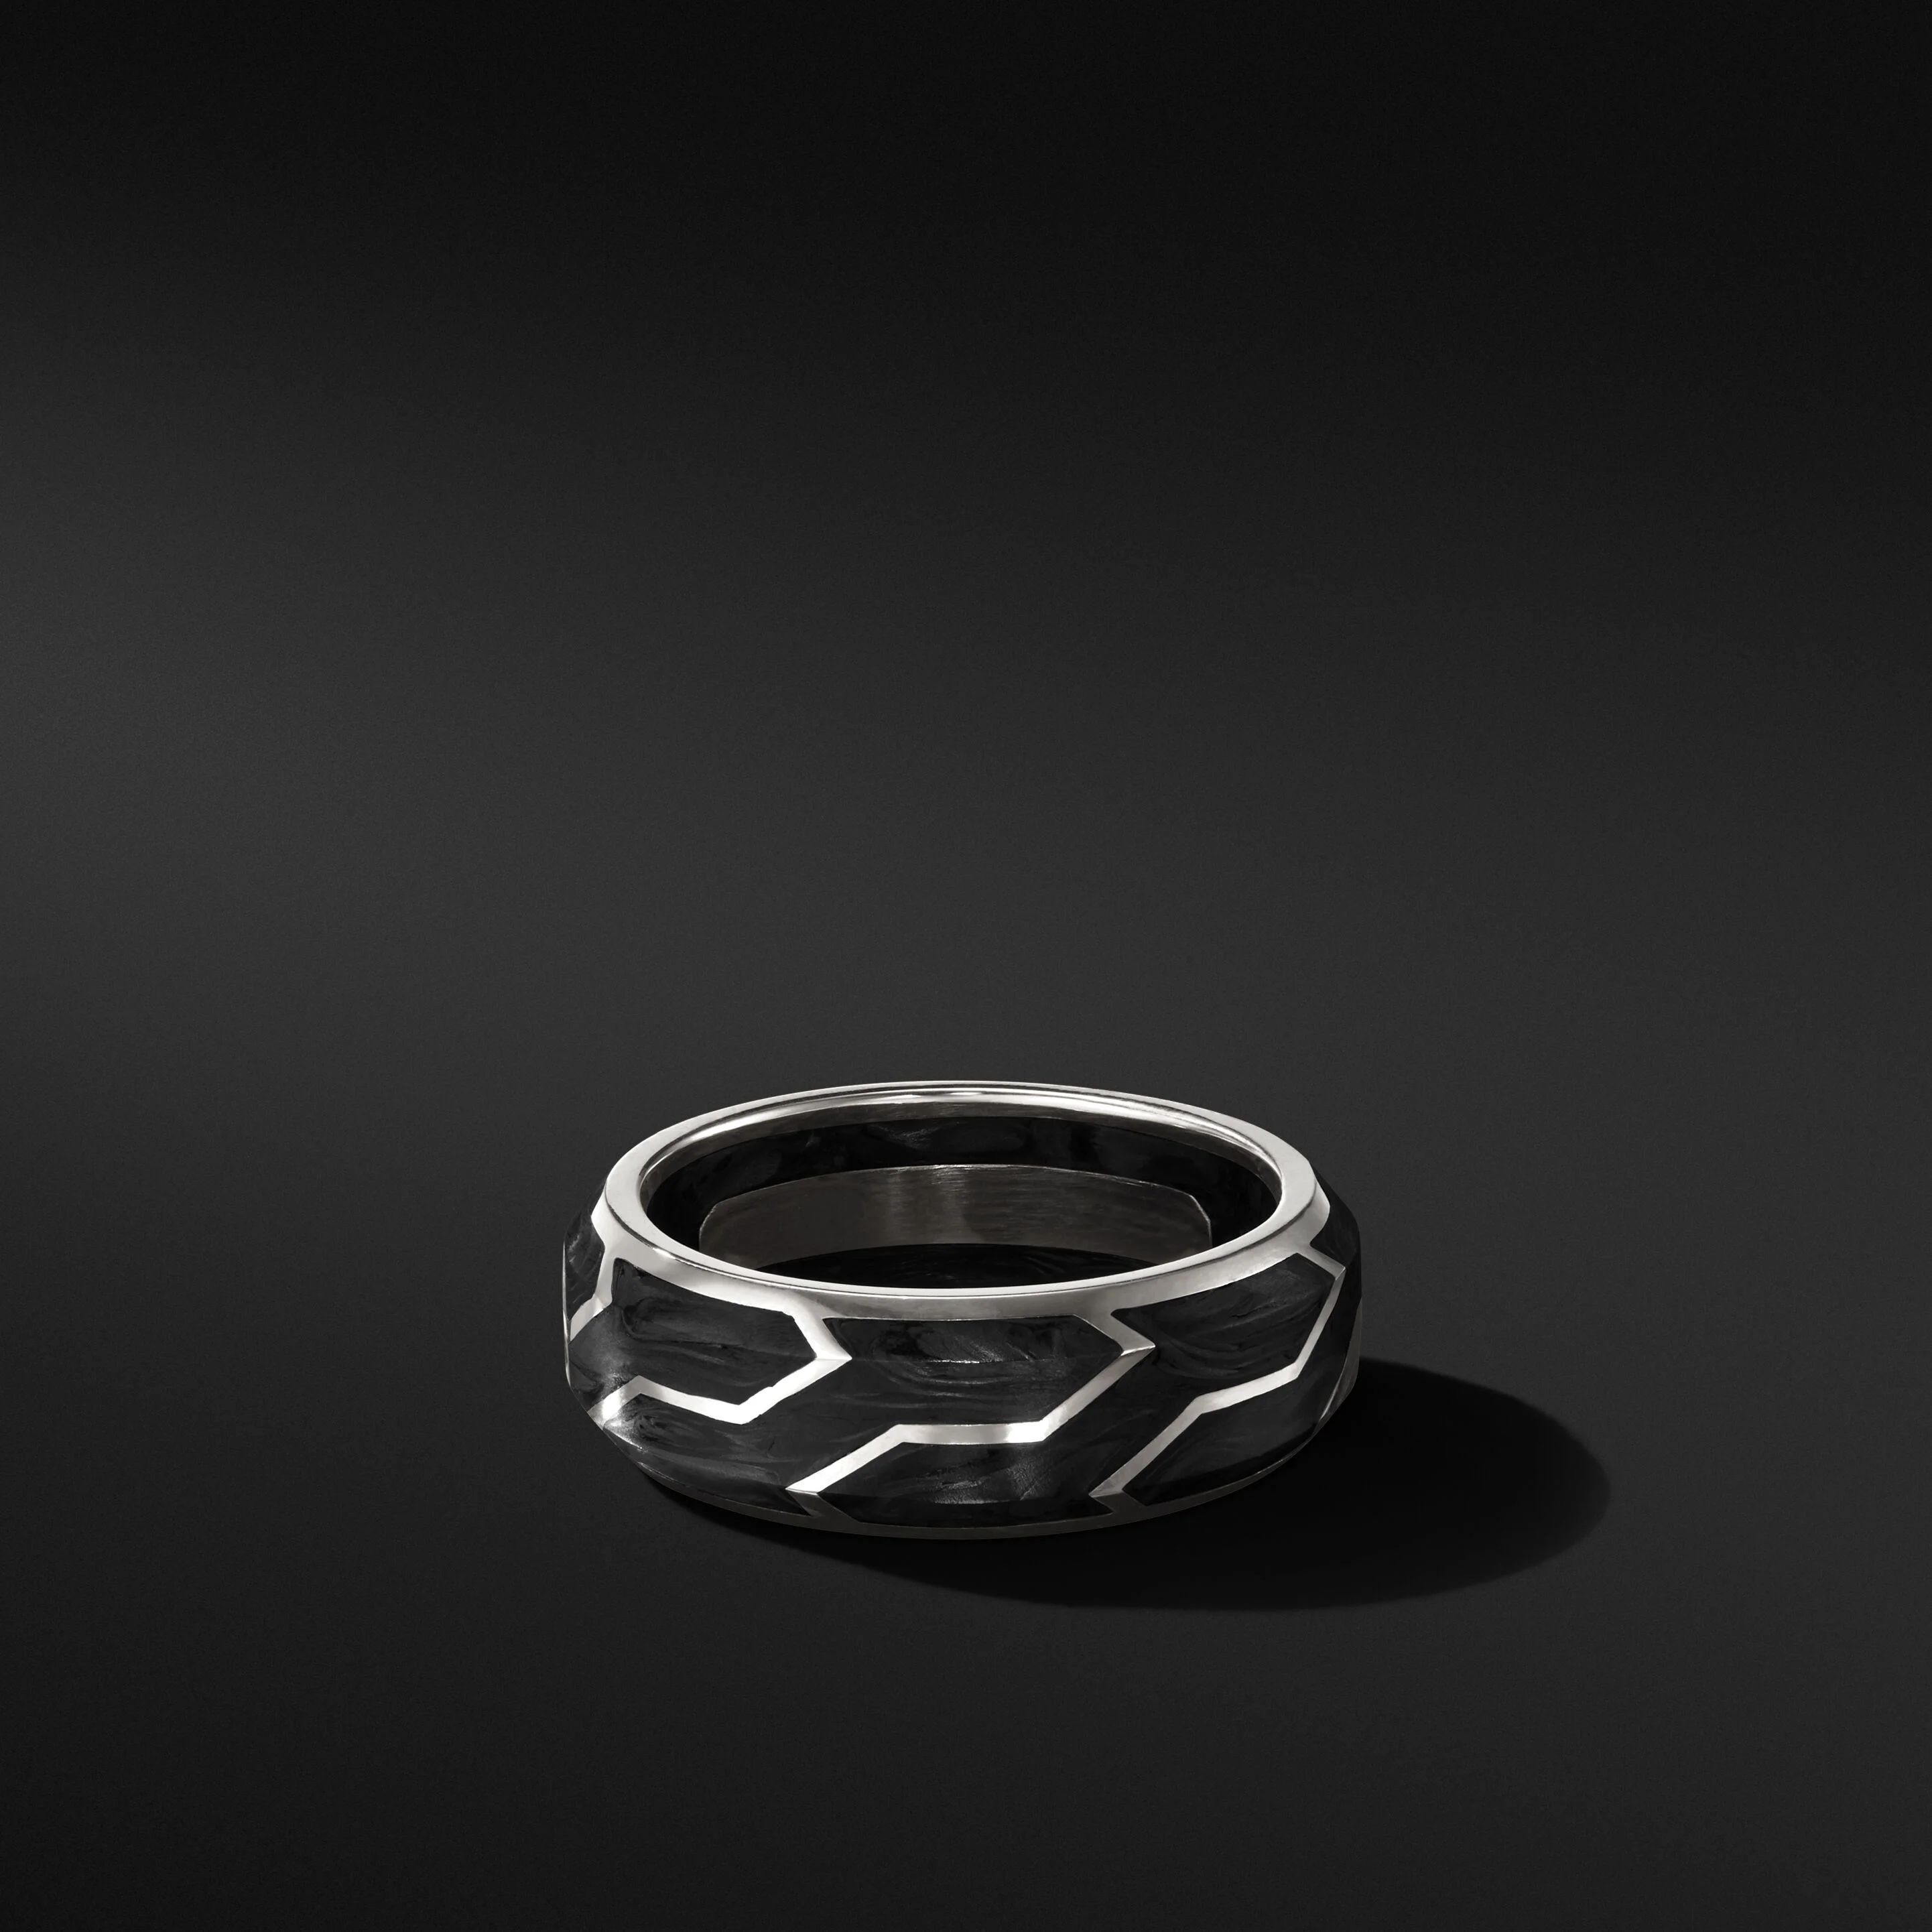 Forged Carbon Band Ring with 18K White Gold | David Yurman